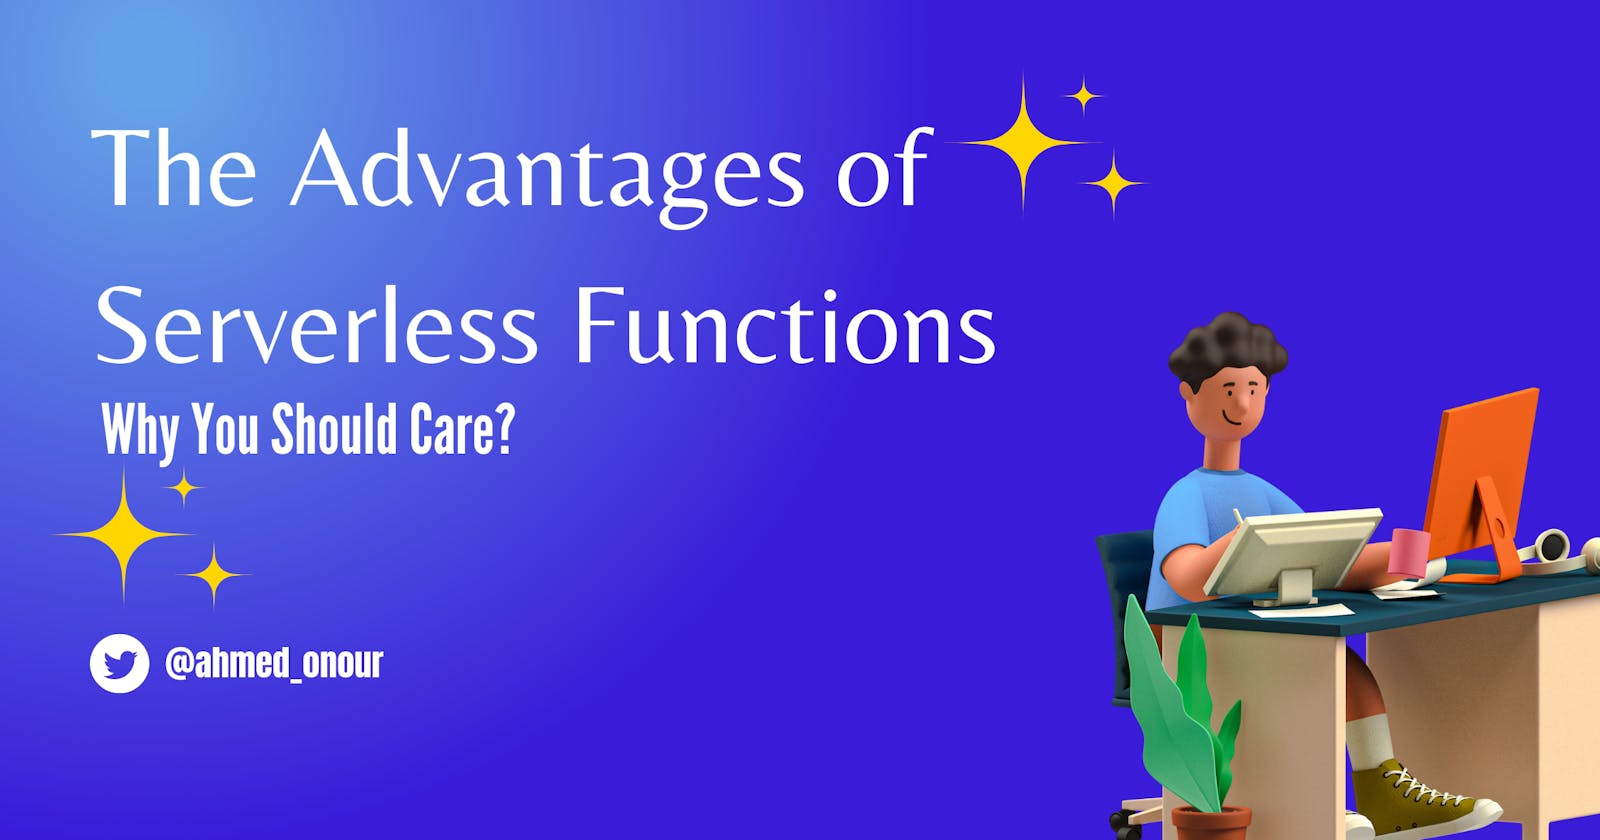 The Advantages of Serverless Functions: Why You Should Care?